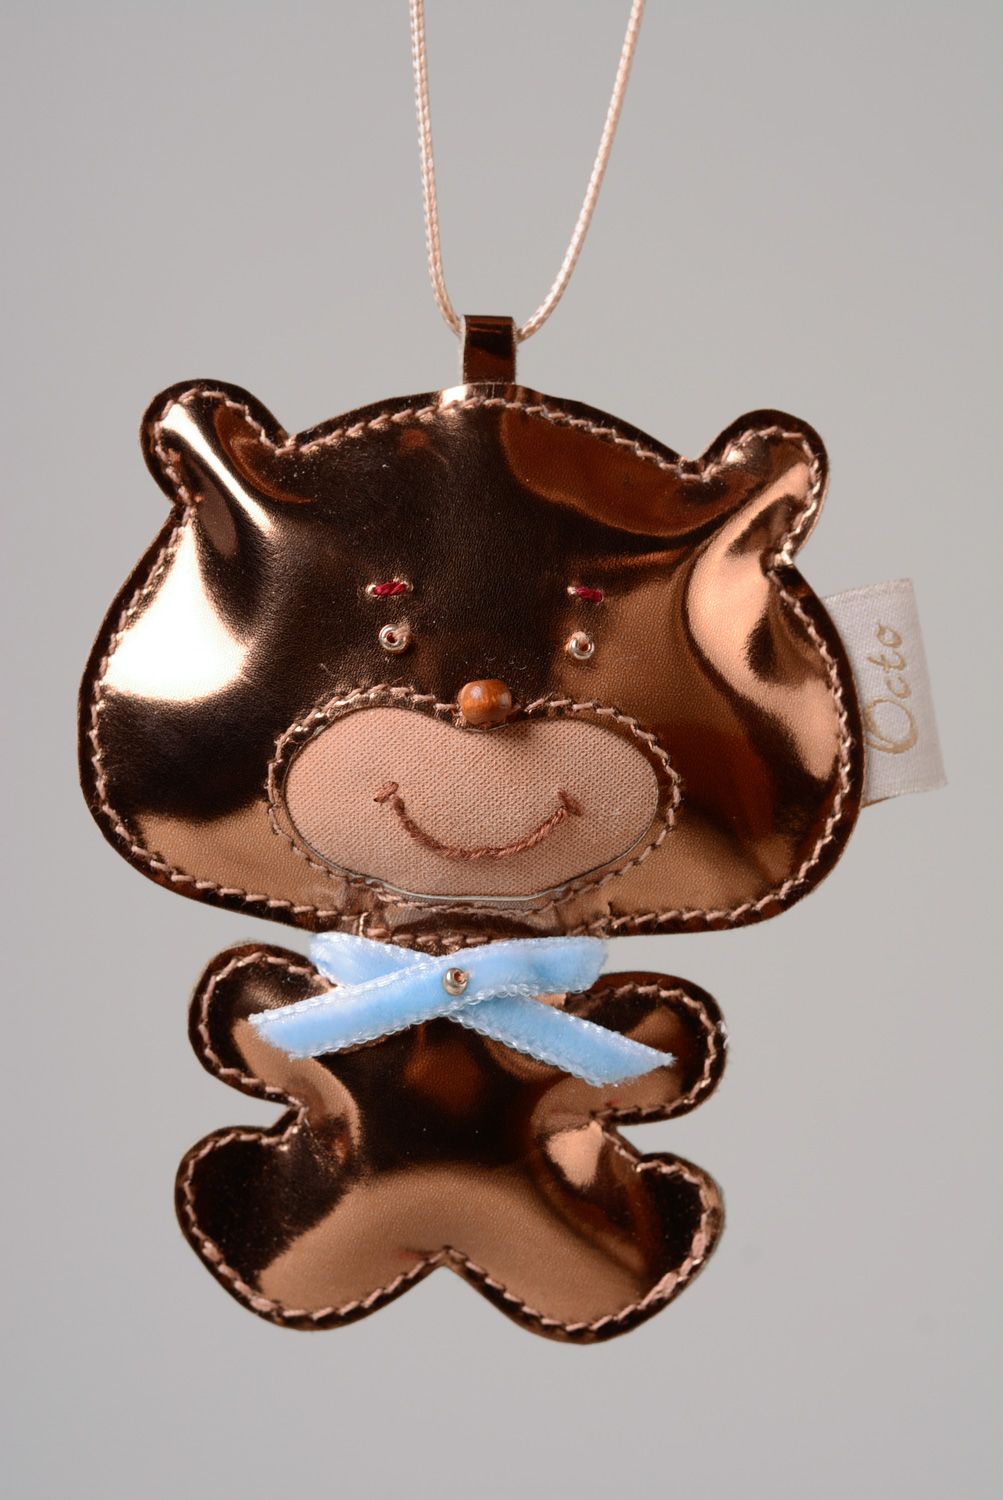 Homemade leather bag charm in the shape of bear photo 1